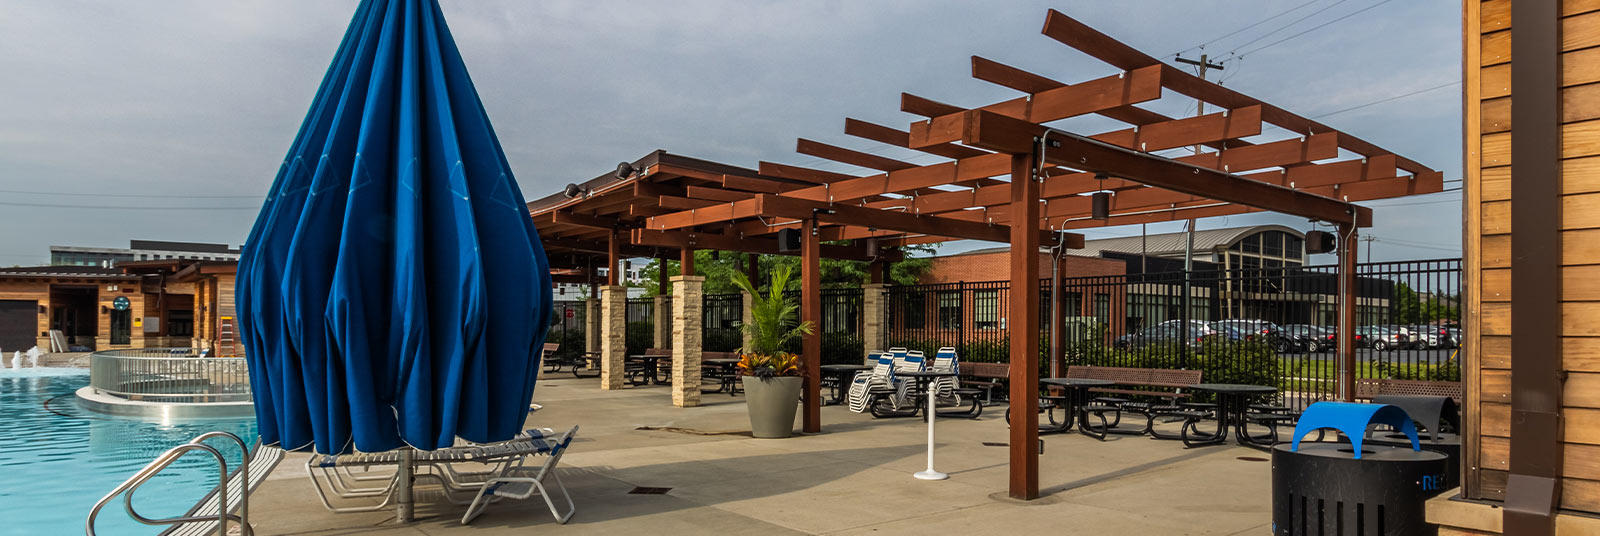 View of the pergolas surrounding the Grandview Heights pool.